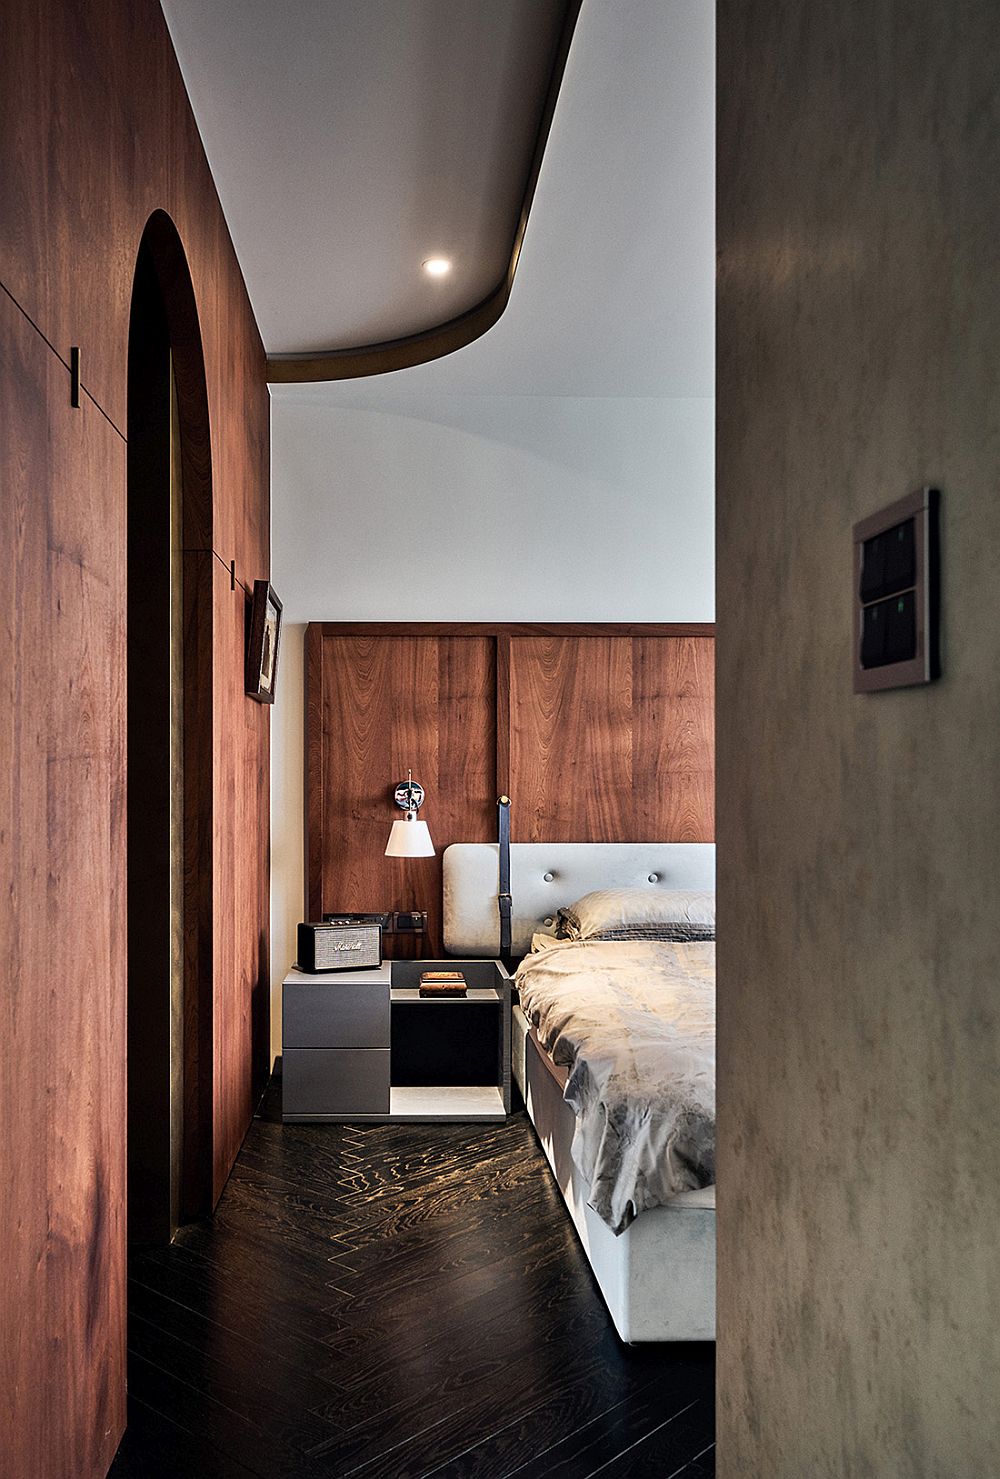 Concrete walls and wooden walls sit comfortably next to one another in the bedroom